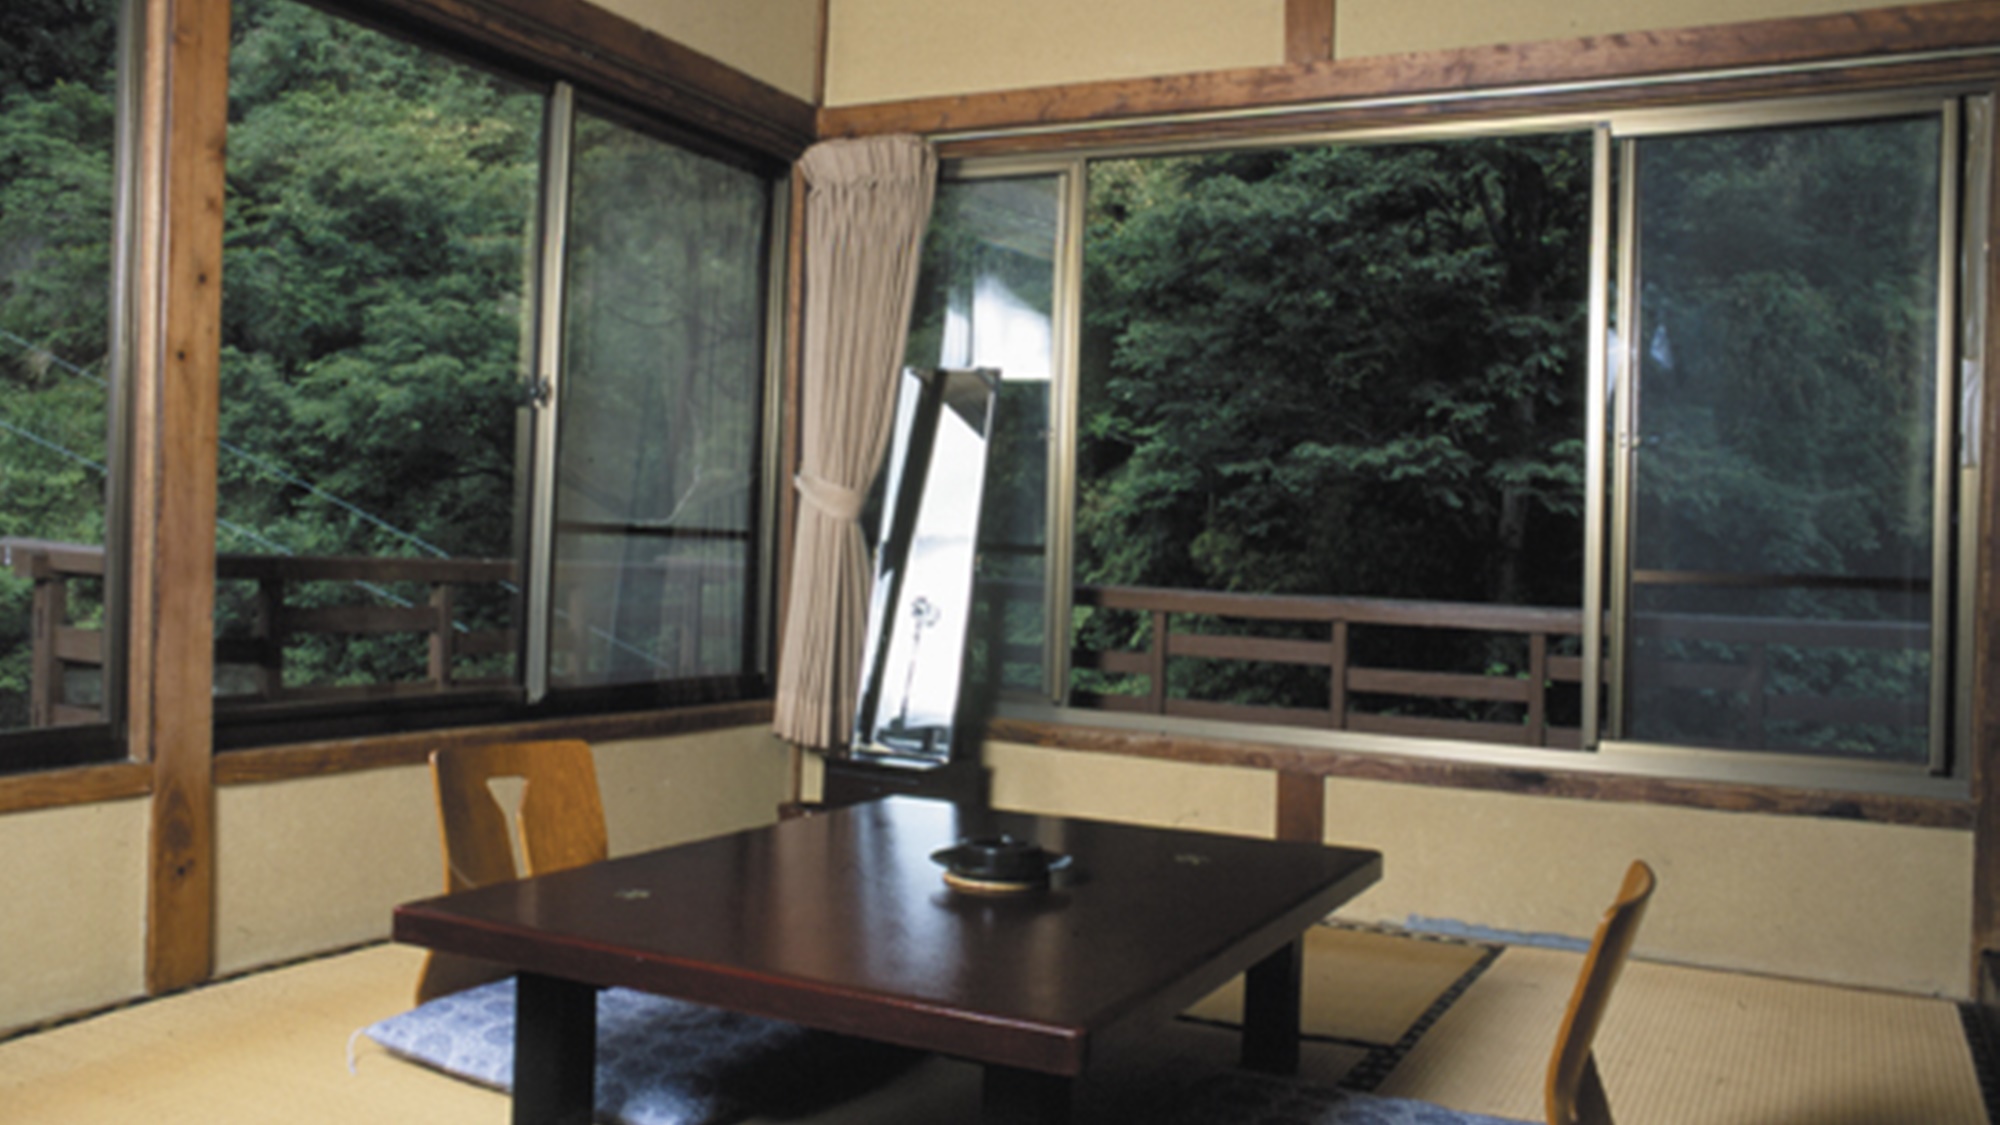 Shimobe Onsen Motoyu Ryokan Daikokuya Ideally located in the Minobu area, Shimobe Onsen Motoyu Ryokan Daikokuya promises a relaxing and wonderful visit. Offering a variety of facilities and services, the property provides all you need for